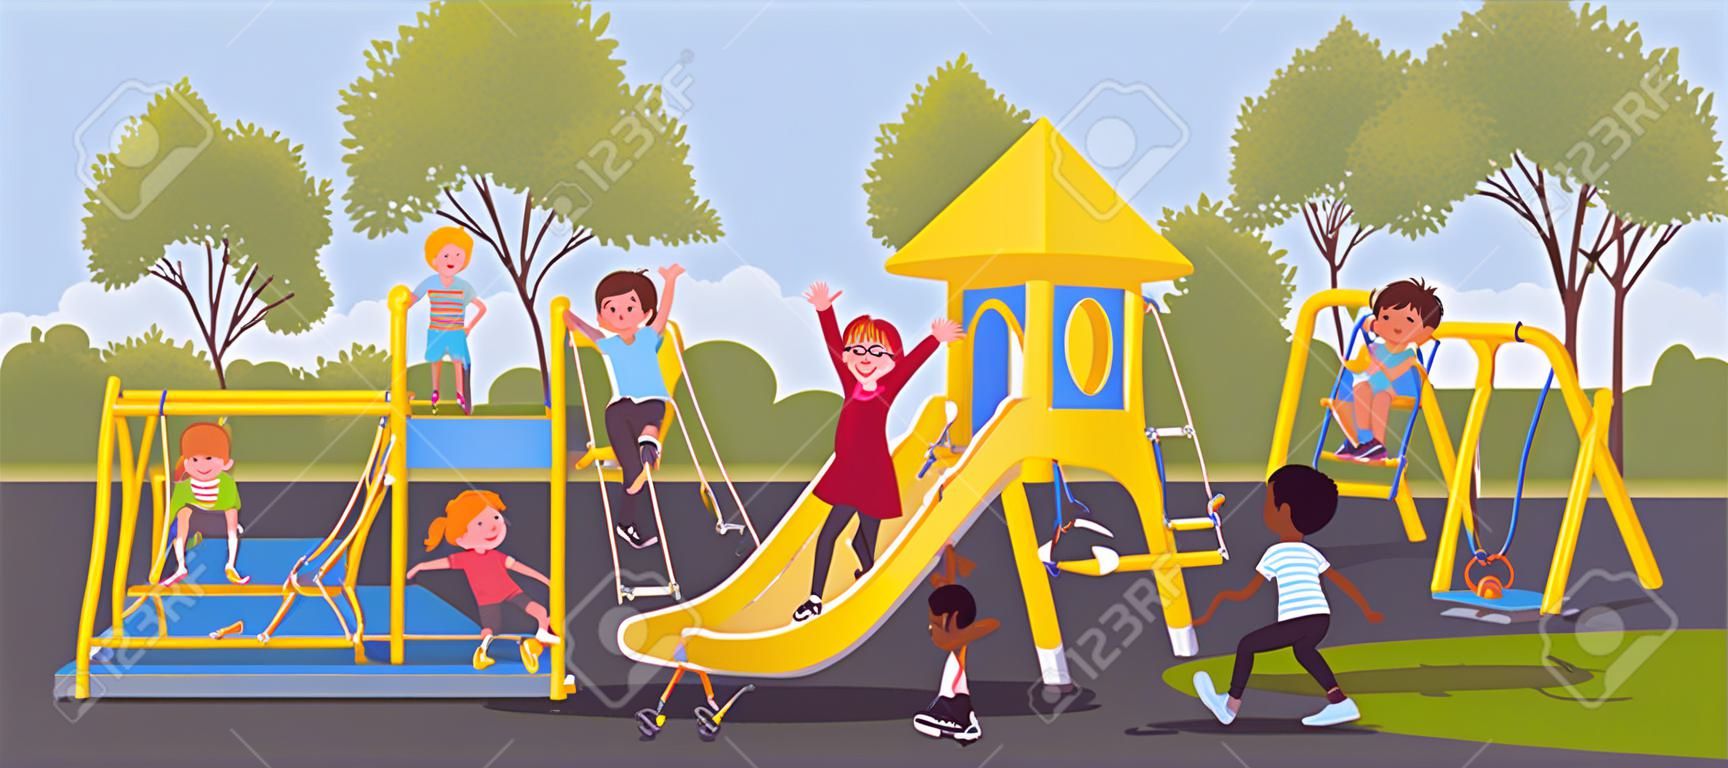 Happy kids playing in playground, leisure outside. Excited boys and girls, active children share fun with friends, outdoor bright park equipment for recreation. Vector flat style cartoon illustration